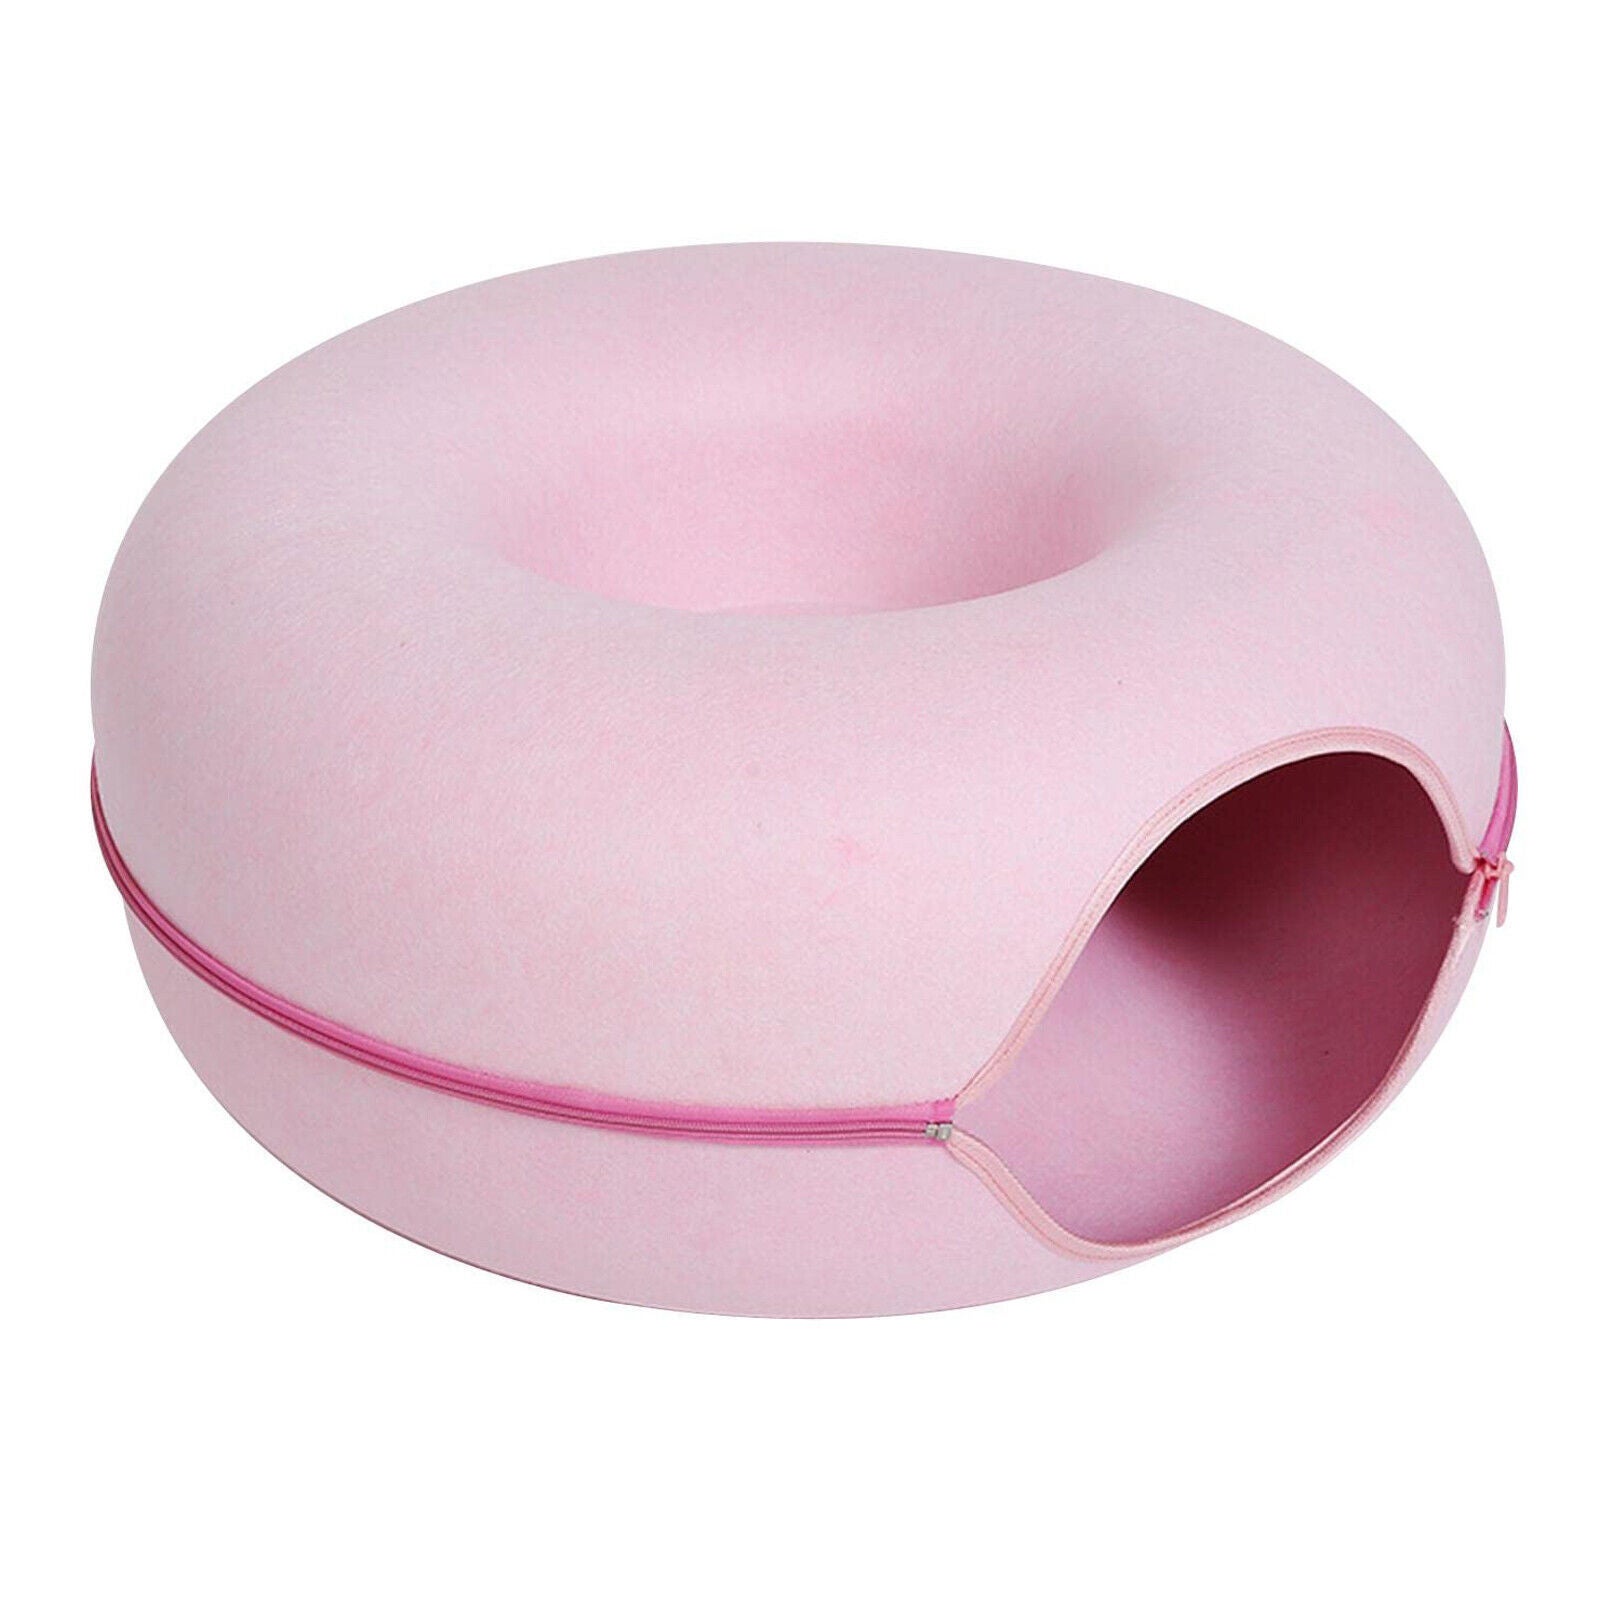 Cat Tunnel Bed Felt Pet Puppy Nest Cave House Round Donut Interactive Play Toy - Large Pink